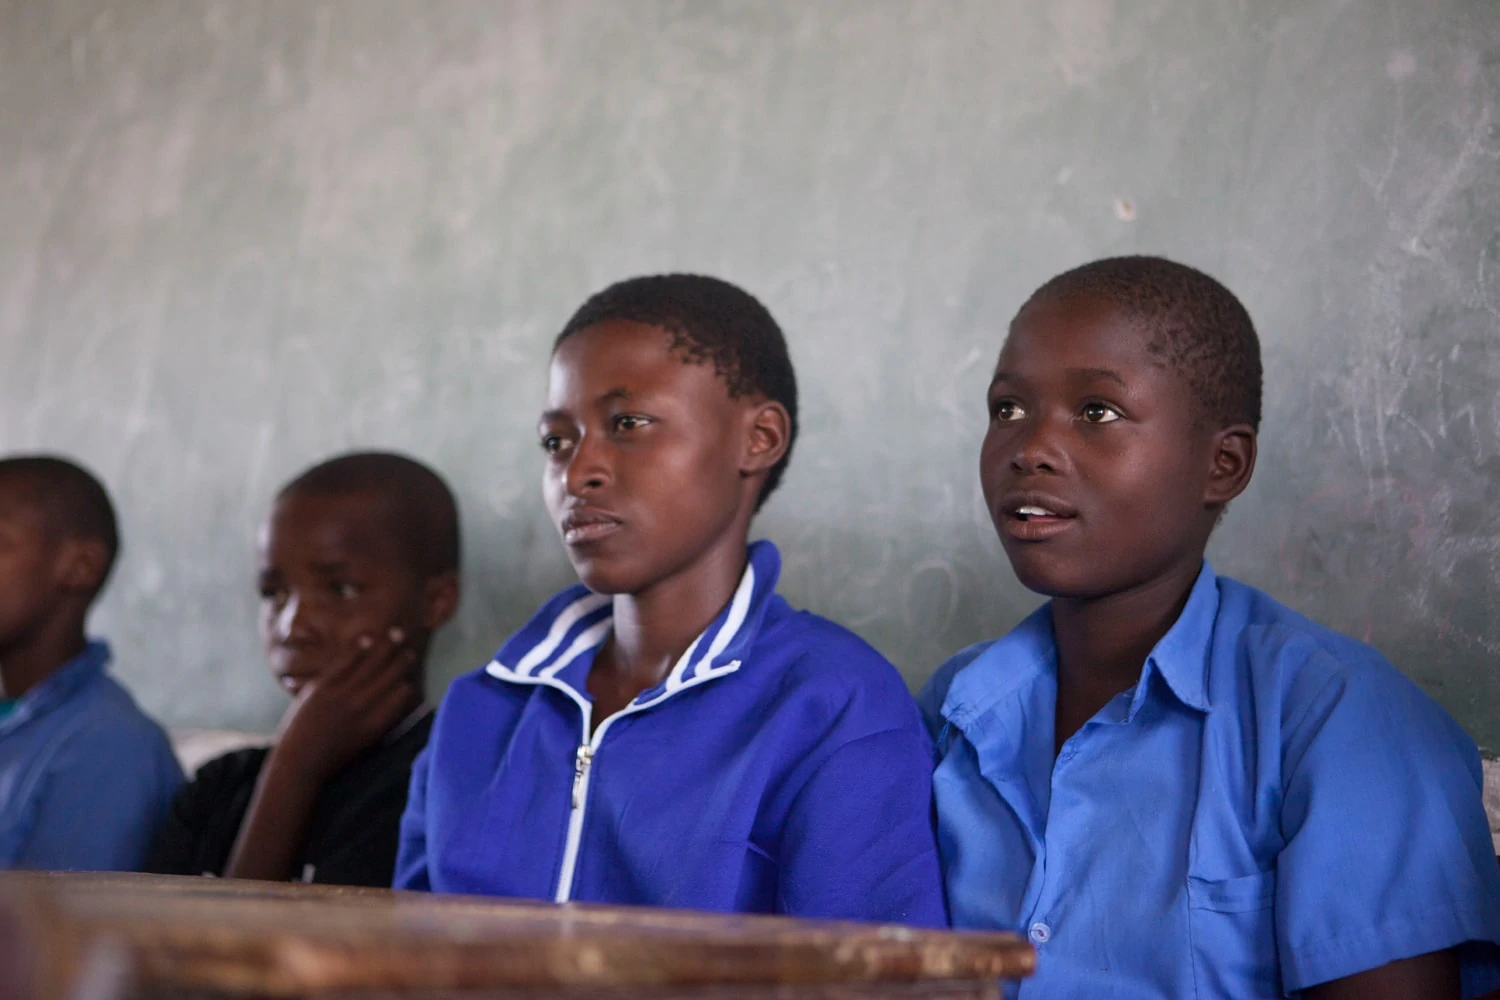 Girls in blue school uniforms look past the camera in concentration.